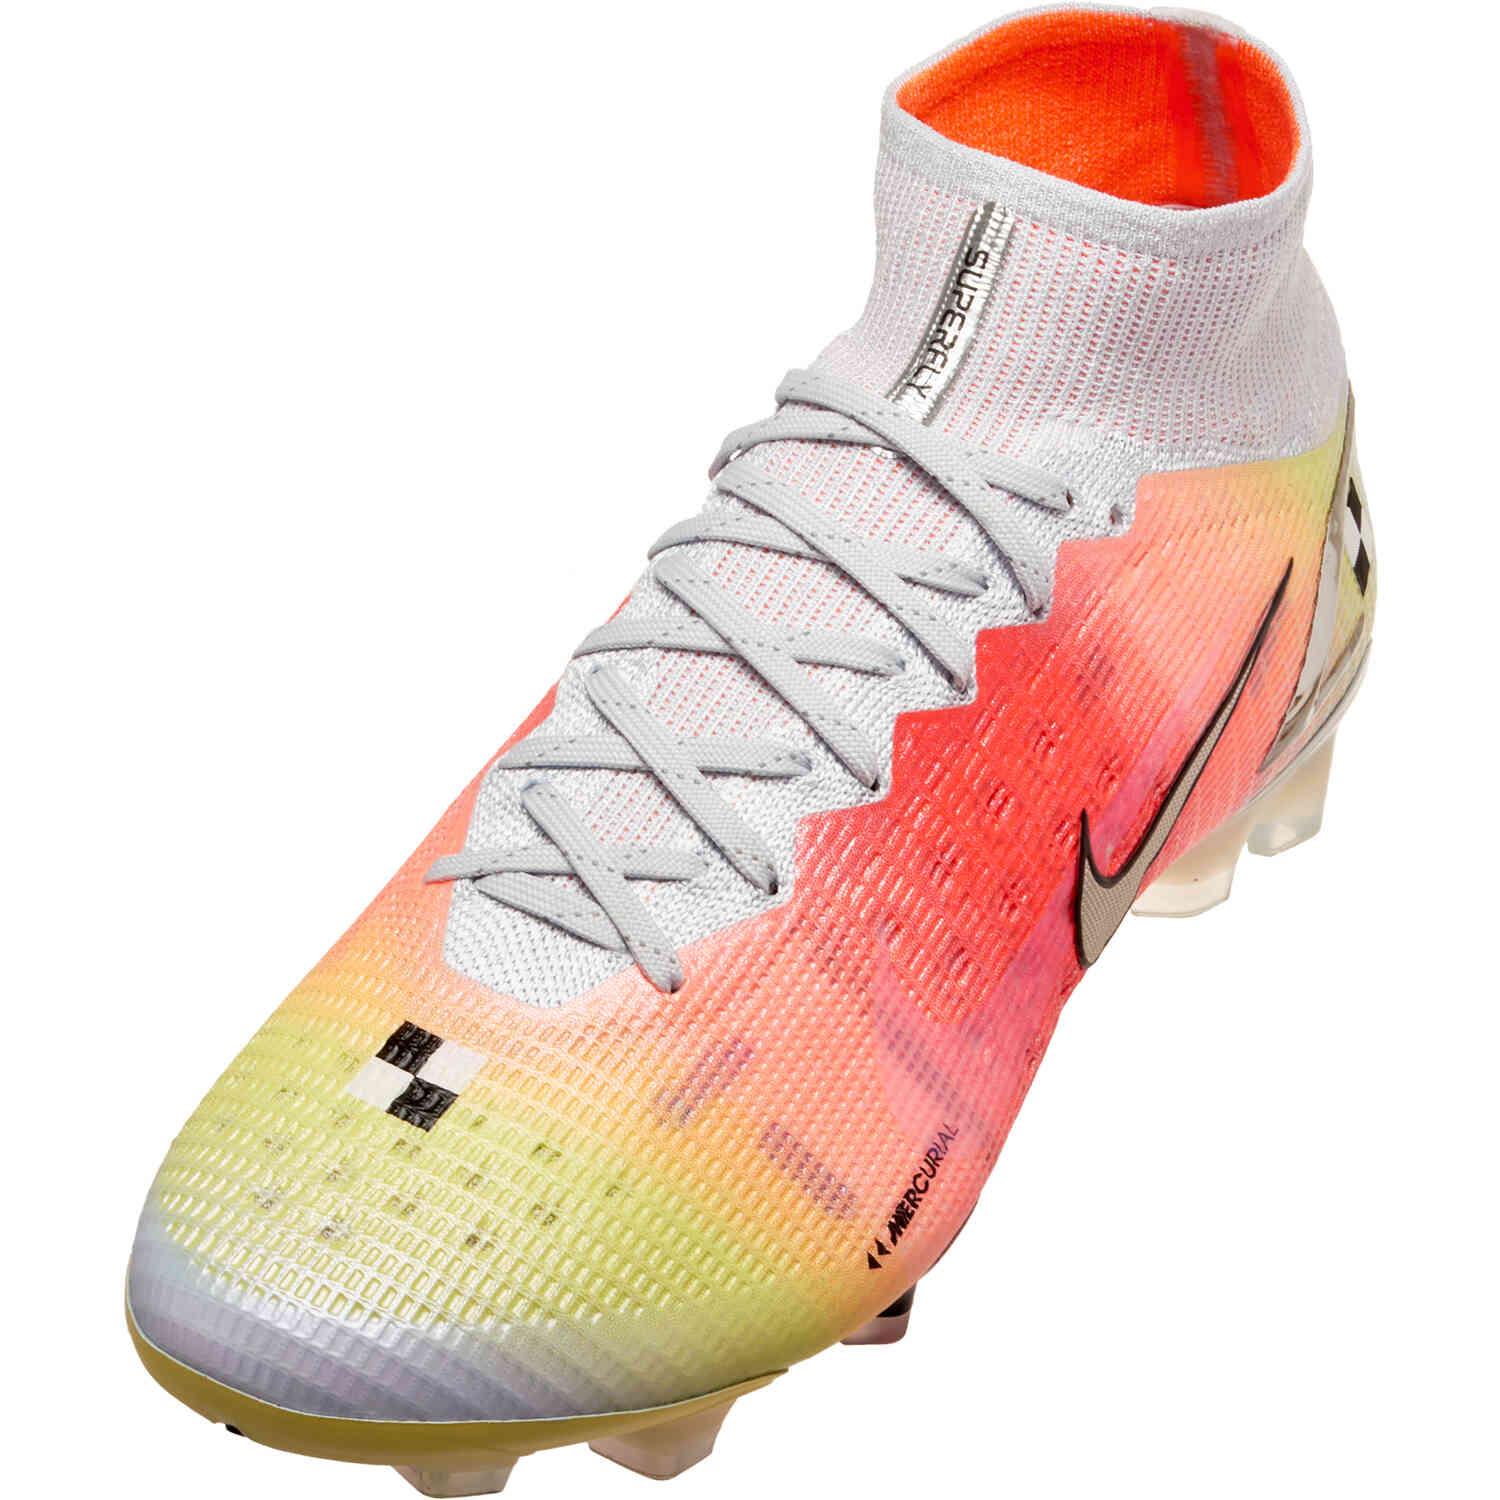 white mercurial superfly